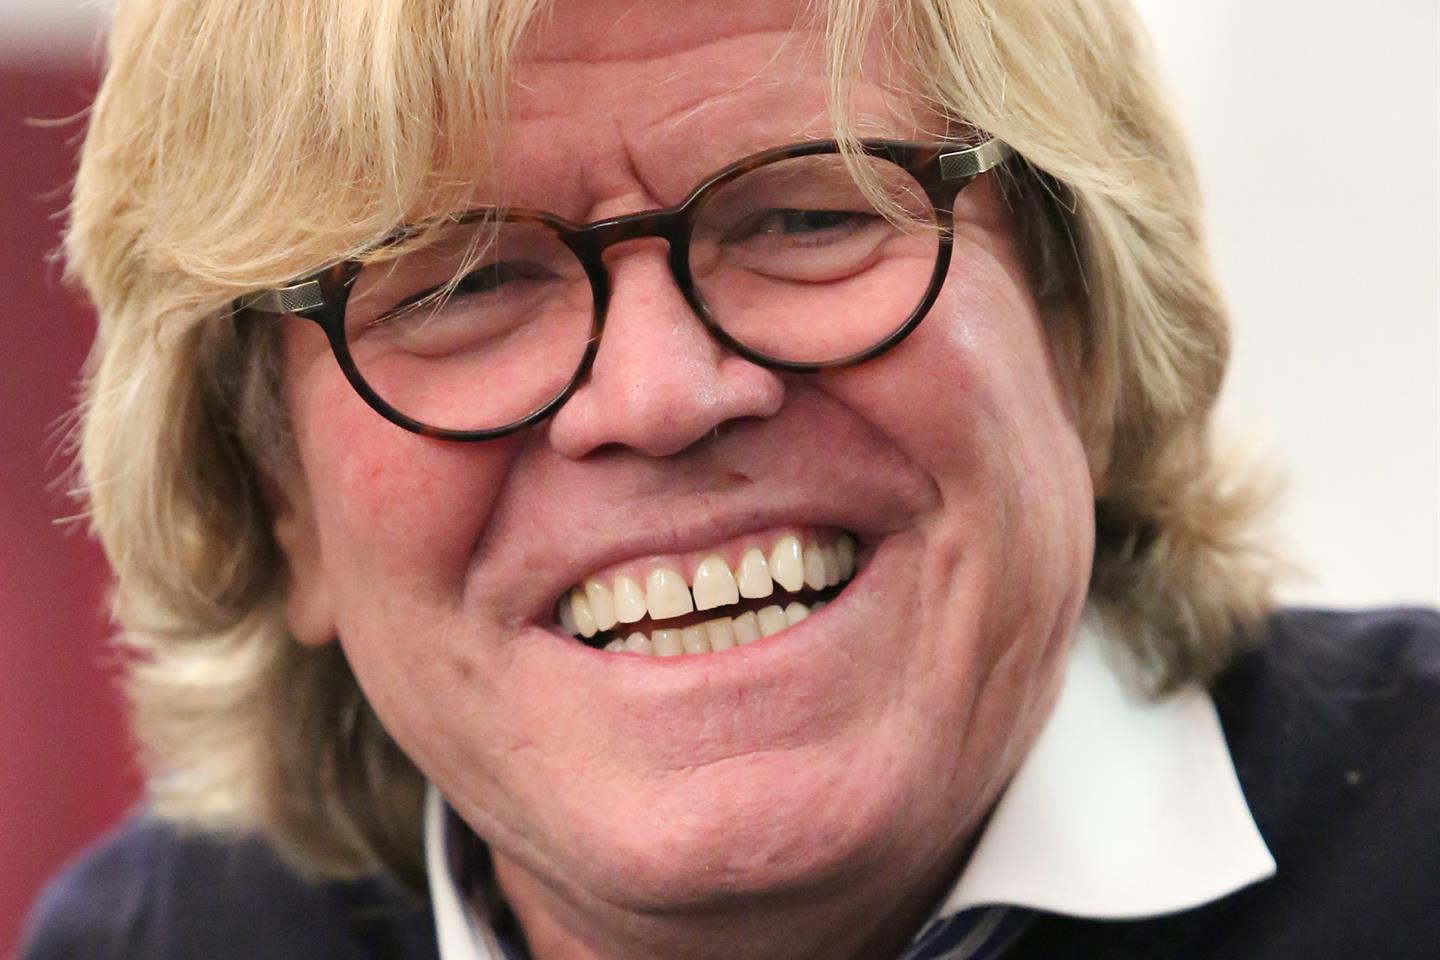 Peter Noone Tickets | Peter Noone Tour 2021 and Concert Tickets - viagogo